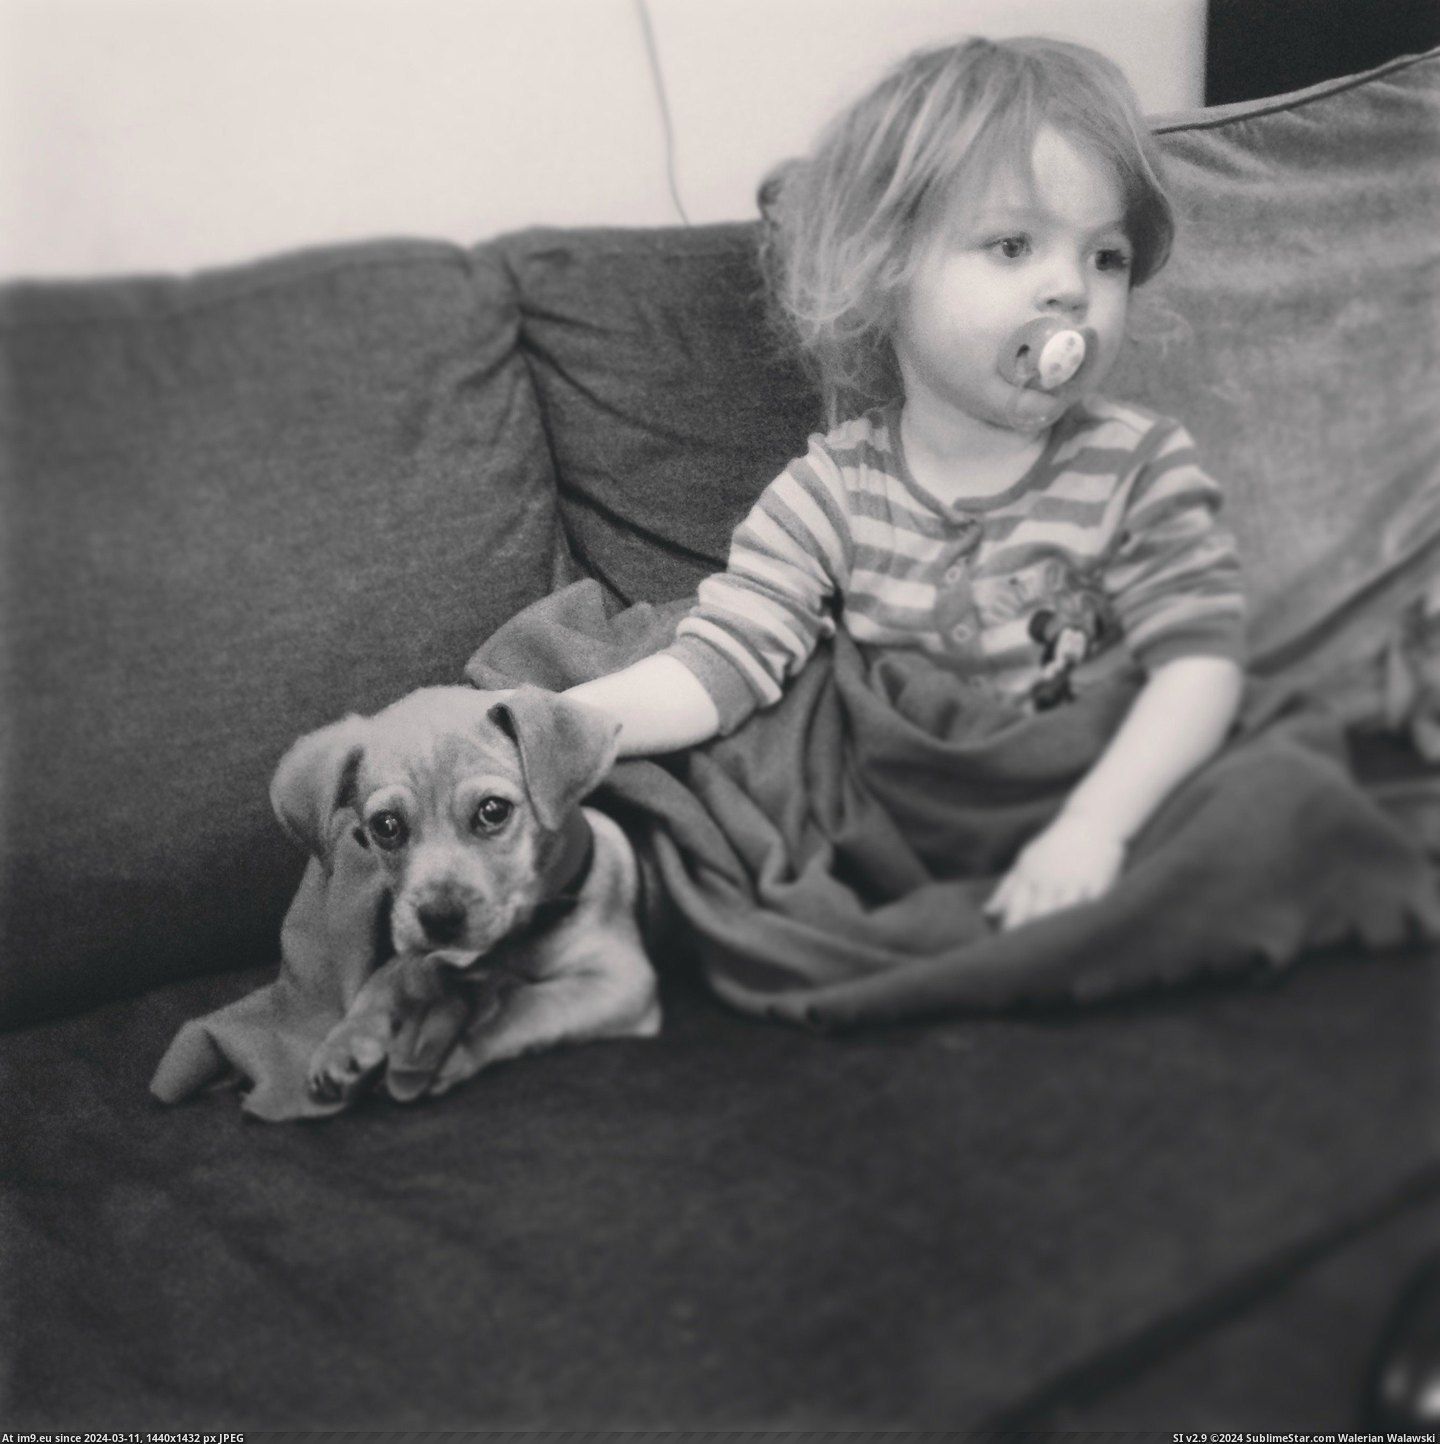 #Thought #Meet #Mad #Mollie #Puggle #Jack #Pup #Toddler [Aww] Everyone thought I was mad getting a puggle pup when I have a toddler already.... everyone meet Mollie and Jack. 1 Pic. (Obraz z album My r/AWW favs))